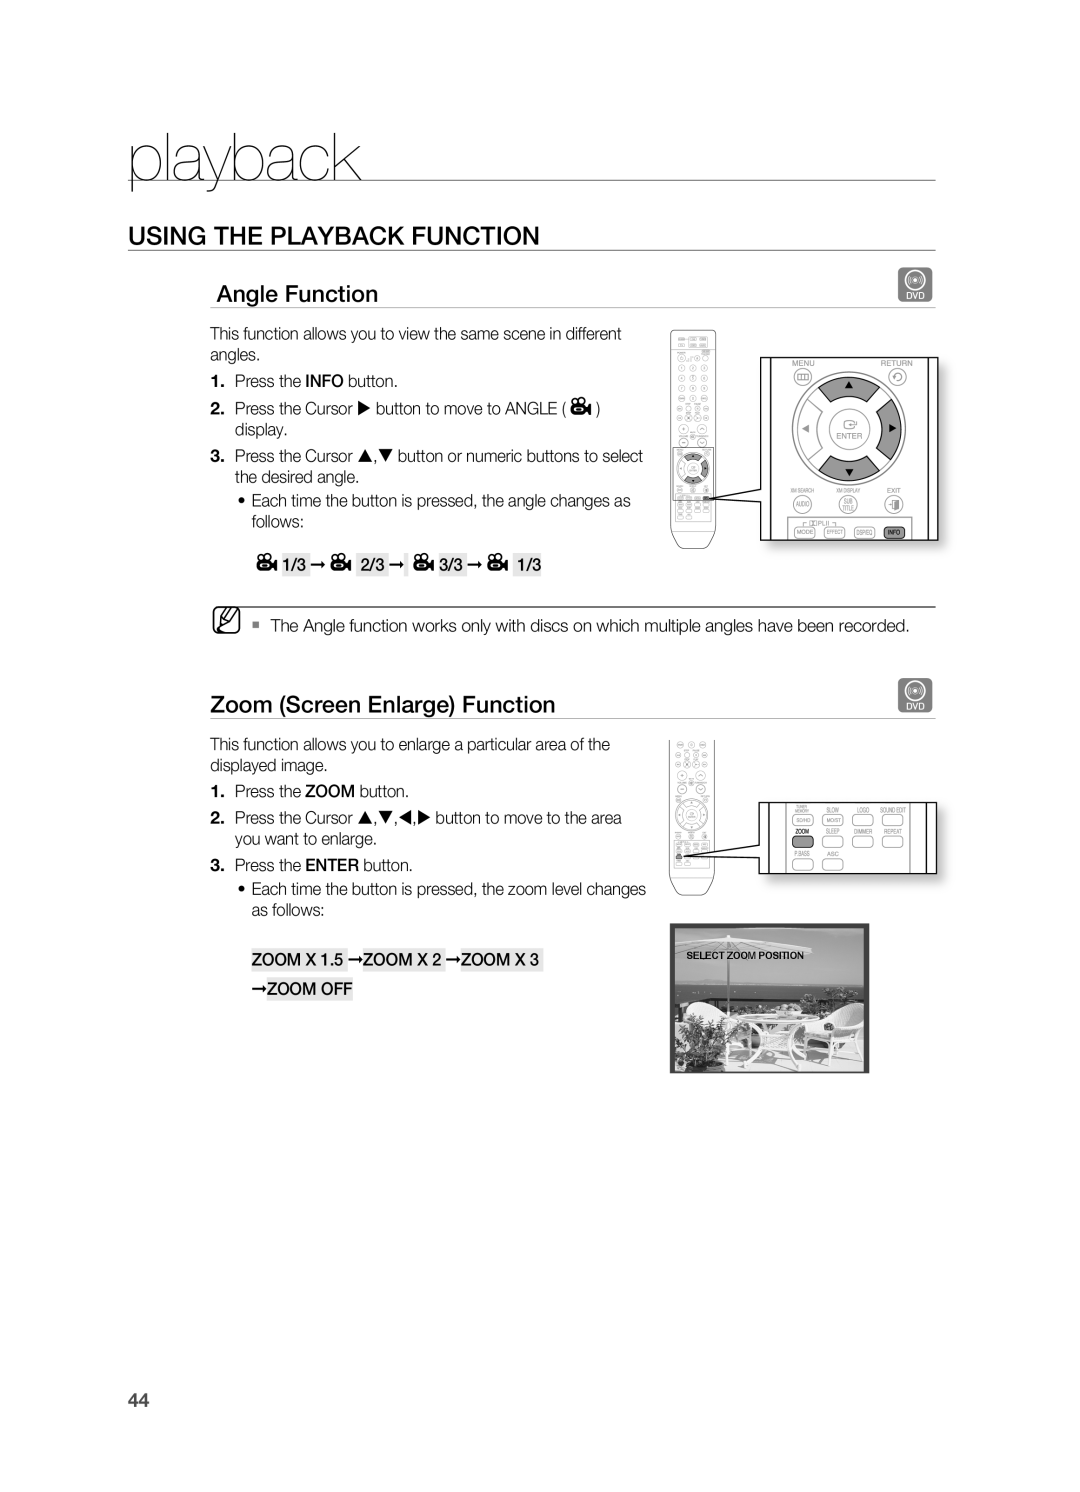 Samsung HT-TZ515 user manual playback, USINg THE PLAYBACK FUNCTION, Angle Function, Zoom Screen Enlarge Function 